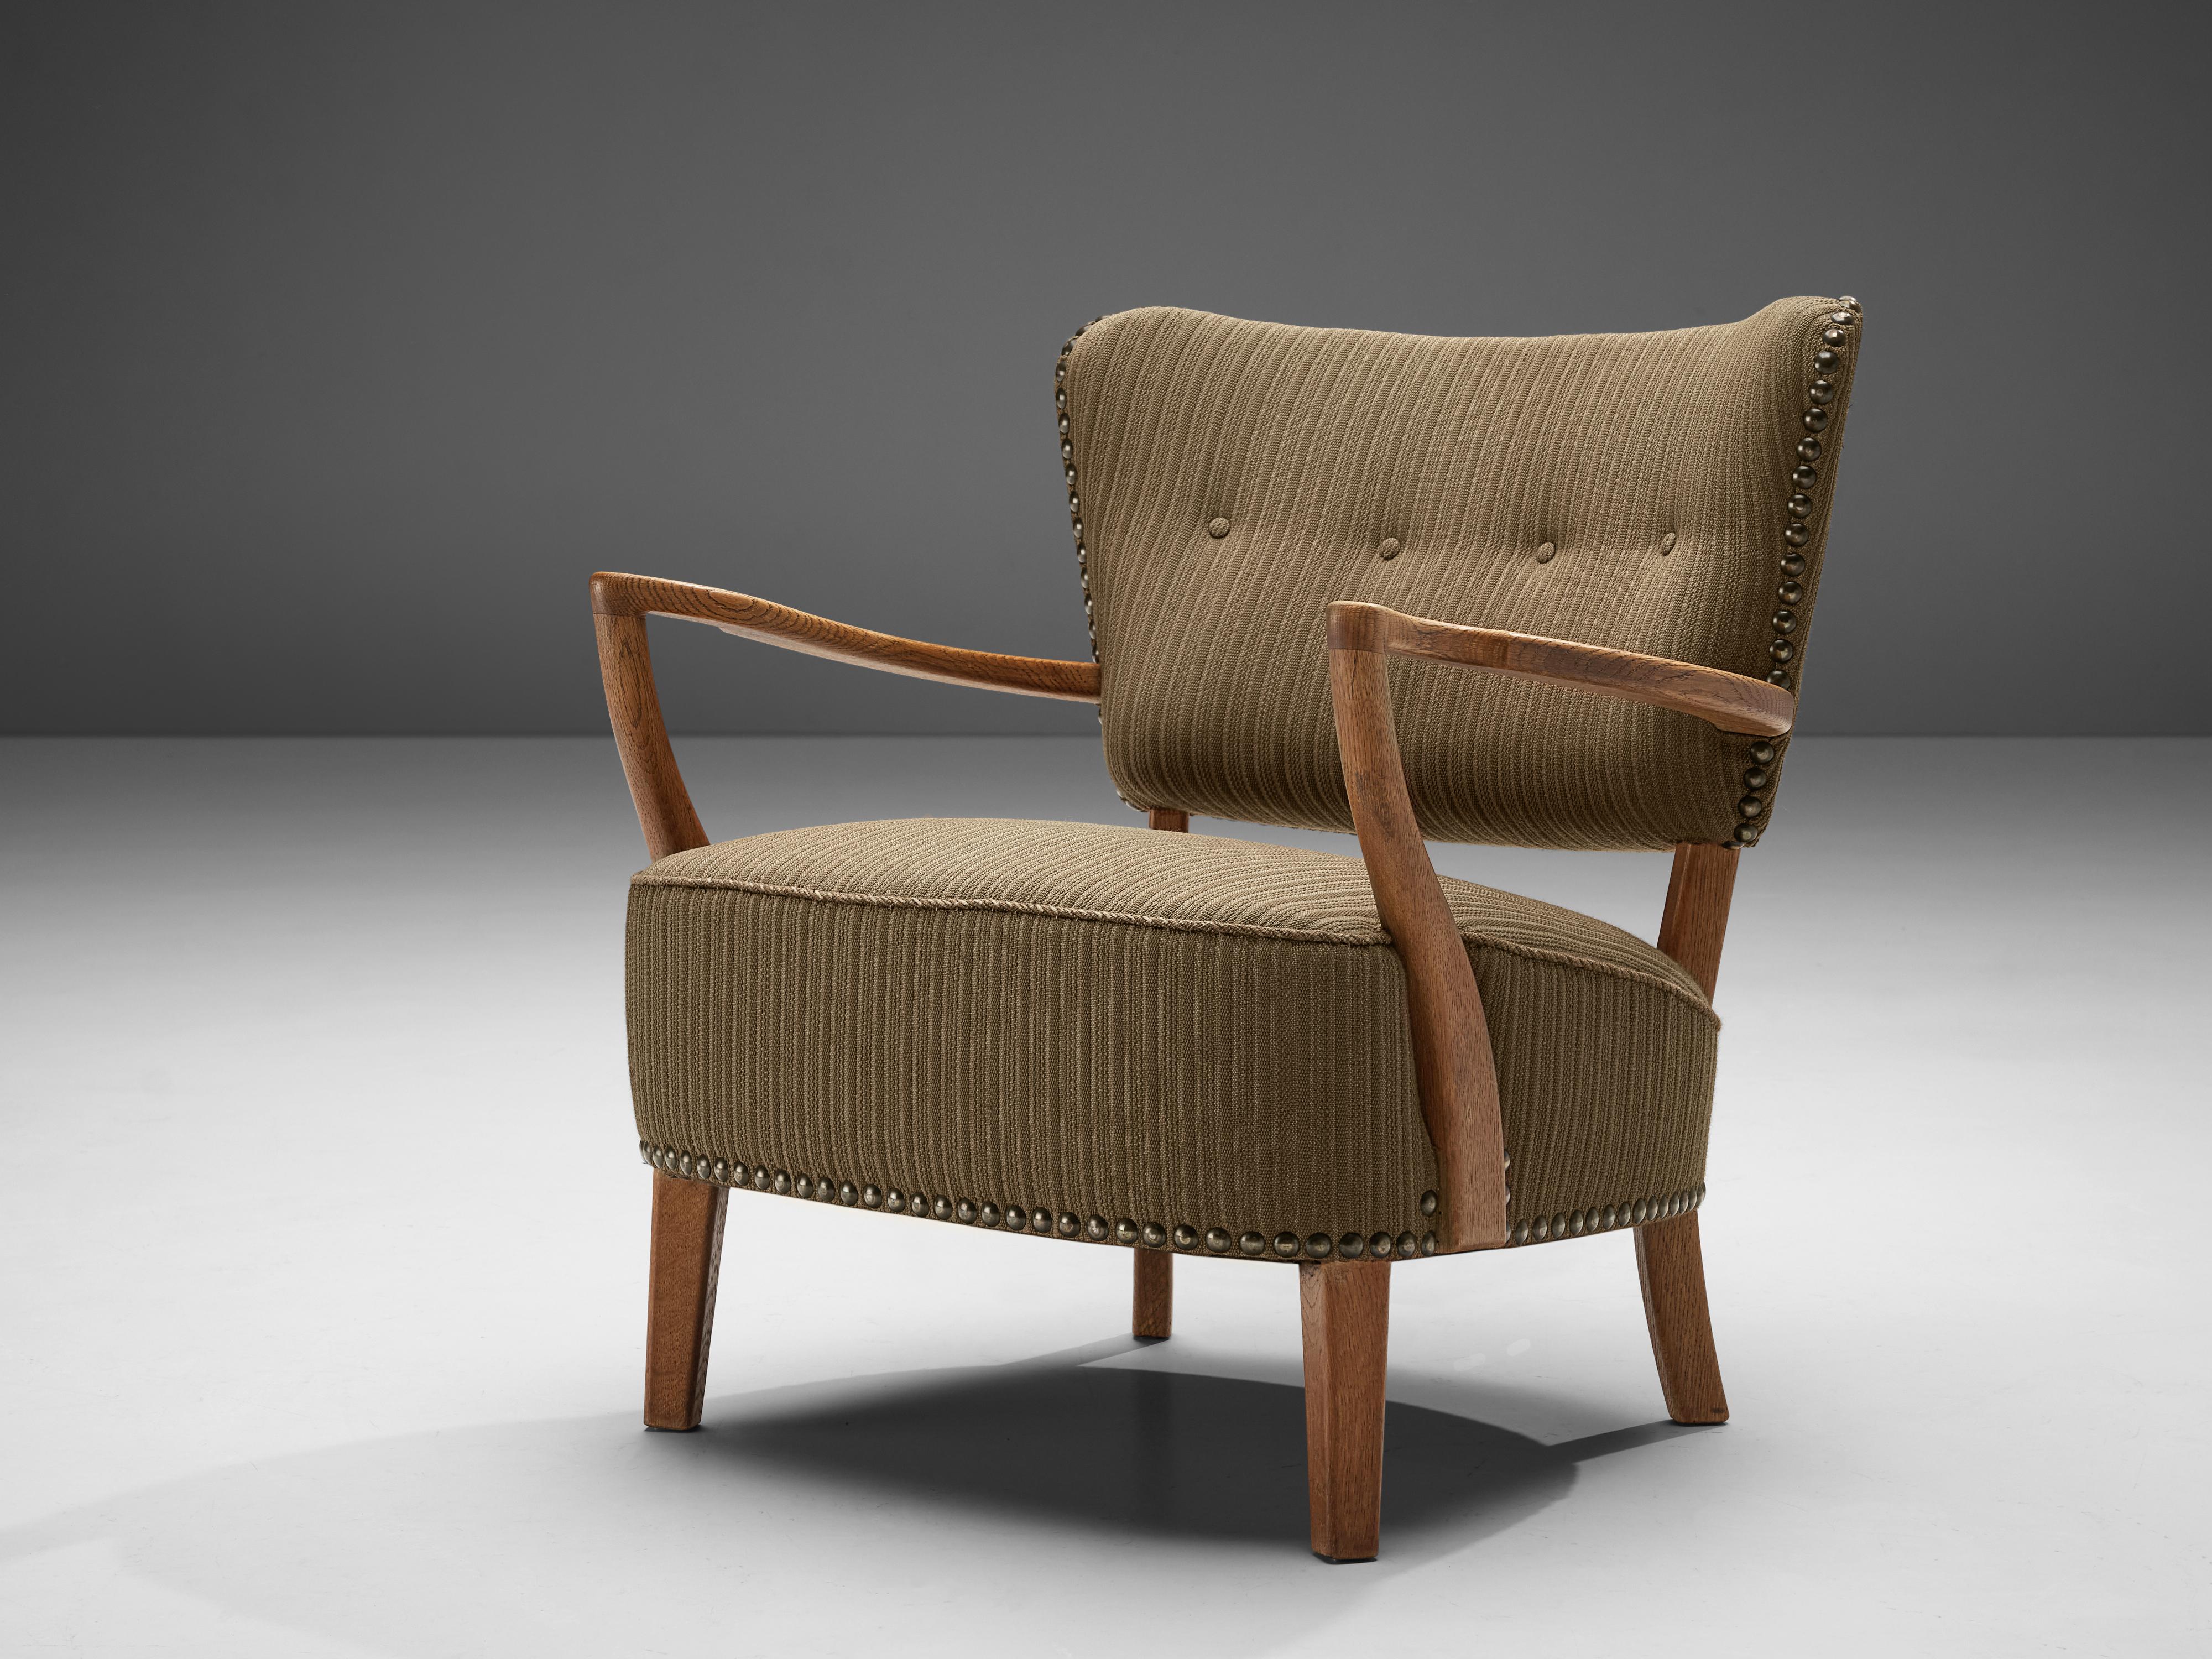 Lounge chair, fabric, metal, oak, Scandinavia, 1950s.

The present armchair is a great example of Scandinavian Modern design. The green brown fabric features subtle stripes and is affixed to the frame with notable metal nails. Tufted details on